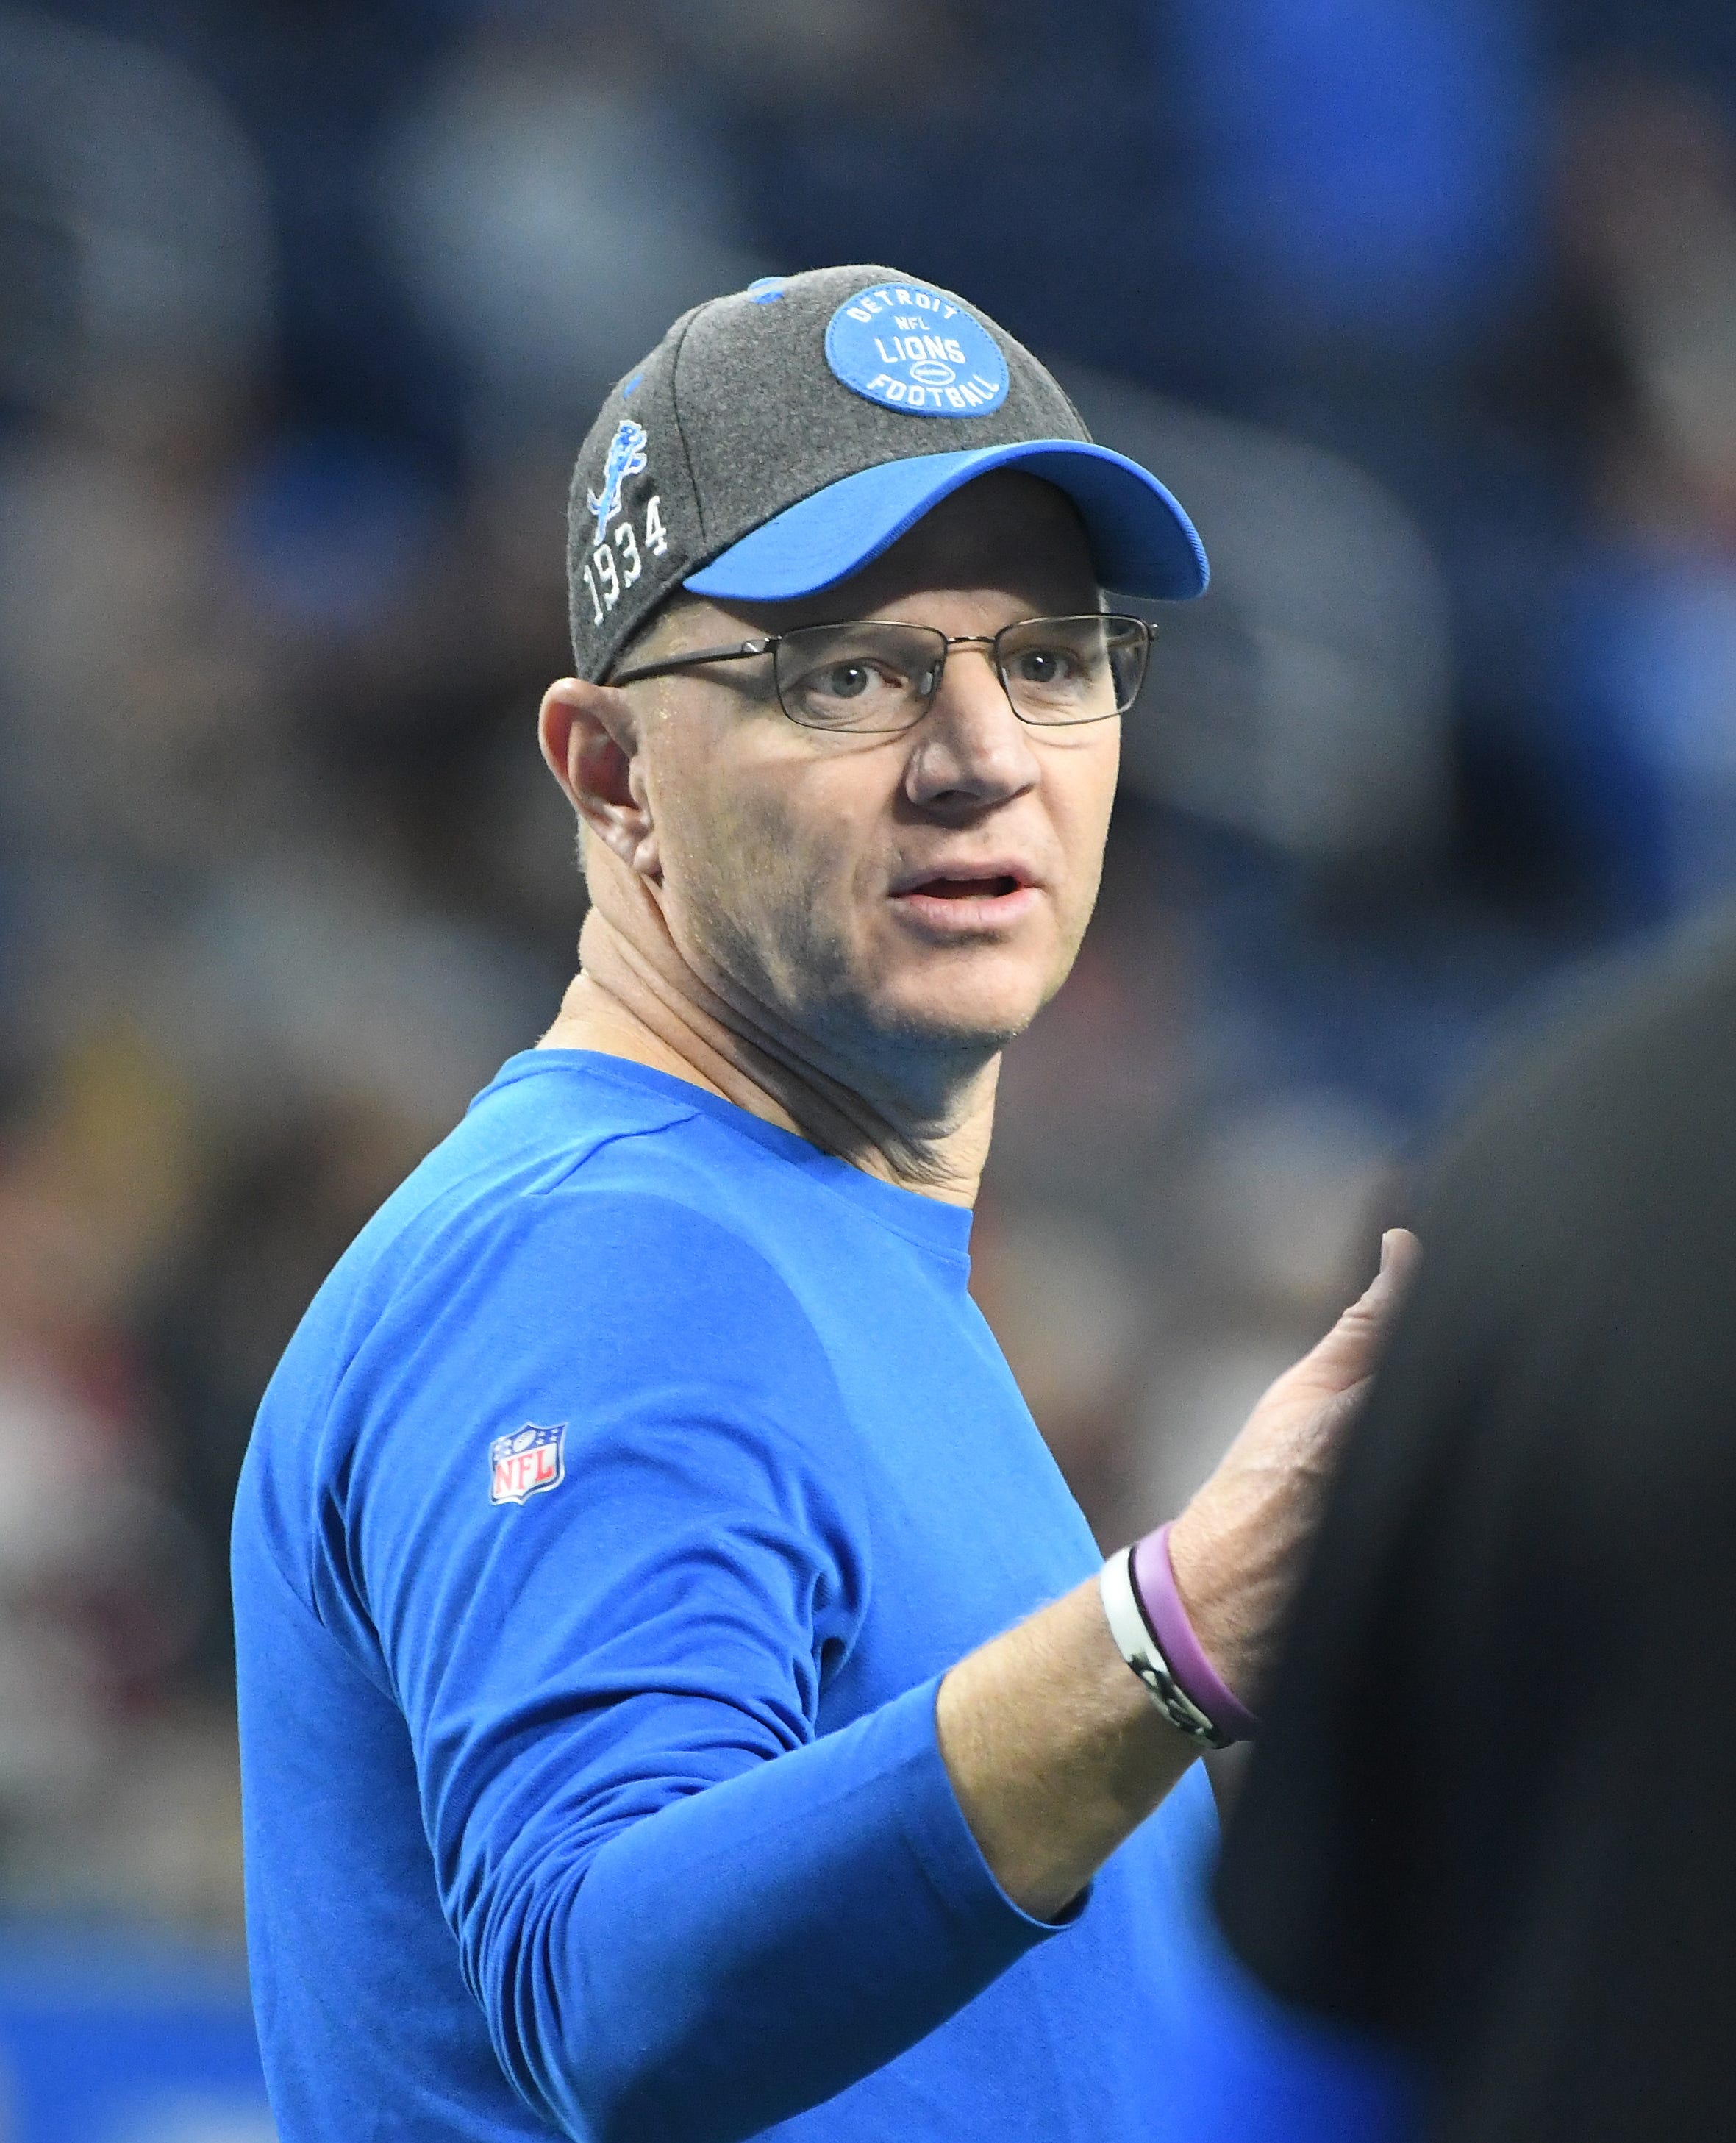 COACHING
Darrell Bevell, offensive coordinator: The Lions rediscovered the downfield passing game under Bevell, and Stafford was on track for his best season before he was sidelined by a back injury. Getting the run game on track was a slower process, but the team showed enough down the stretch to provide optimism for next season. Finally, the first-year coordinator showed a knack for getting the team off to hot starts with his scripted play sets, but was less consistent with sustaining success throughout games, once adjustments came into play. Grade: B+